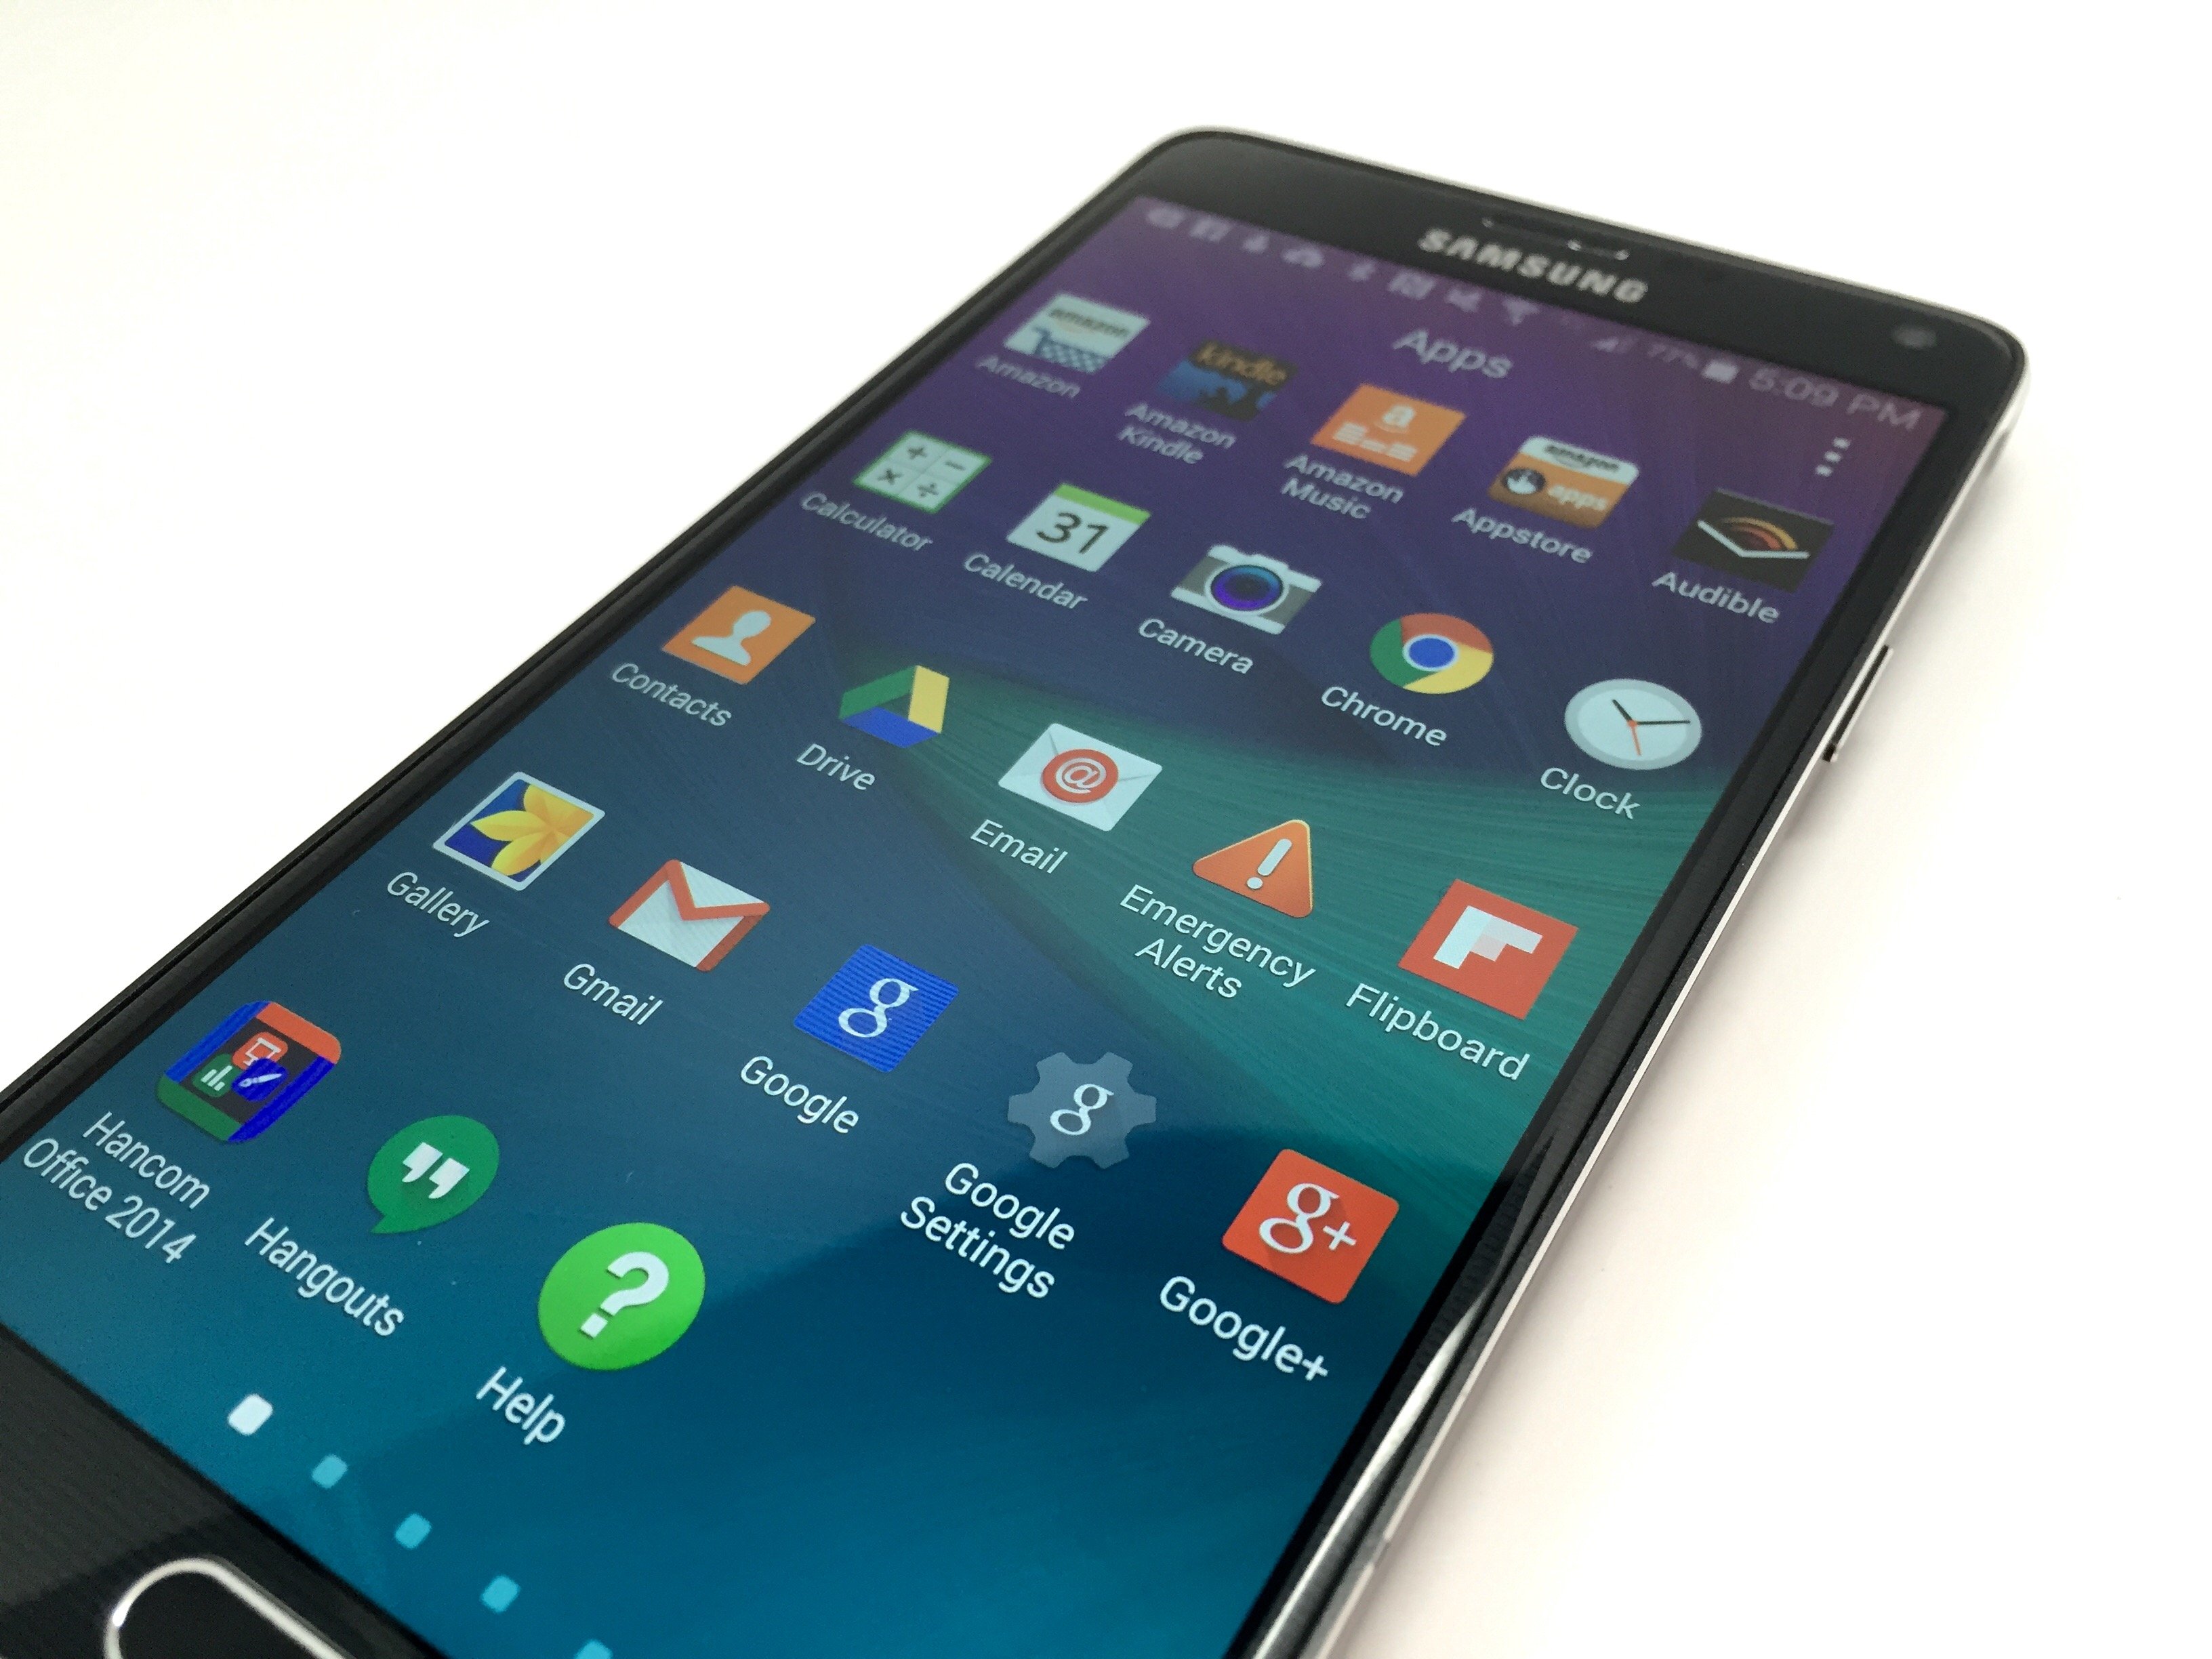 You will need to pay for some of the best Galaxy Note 4 apps.